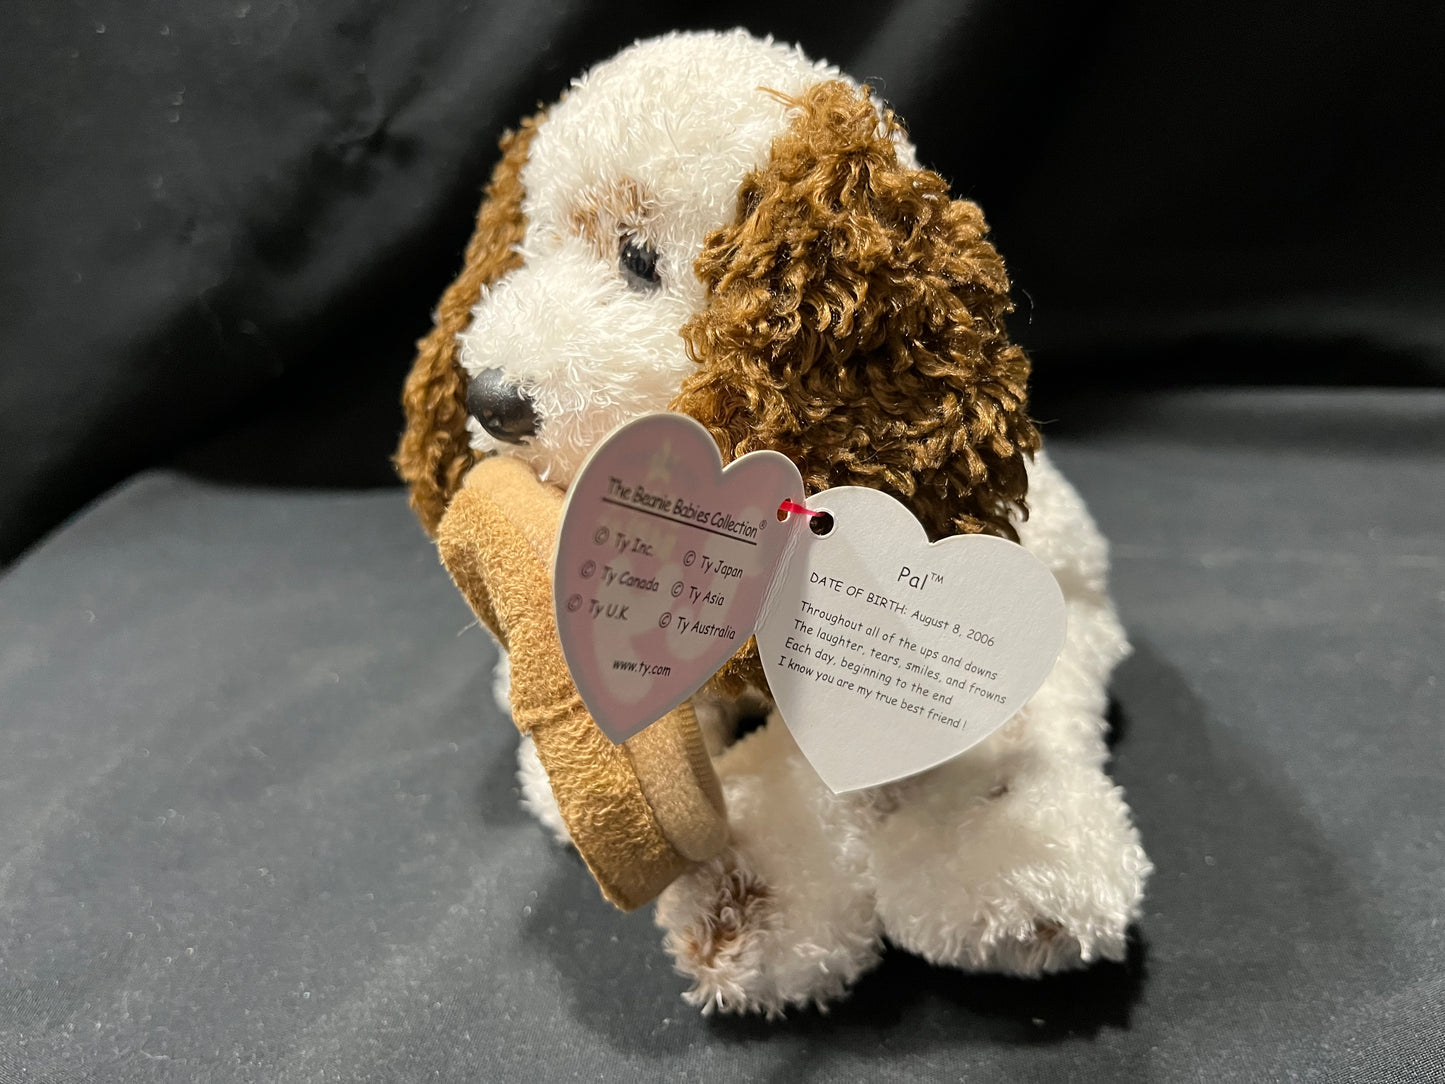 TY Beanie Baby PAL White and Brown Dog Holding Slipper - Web Exclusive 2006